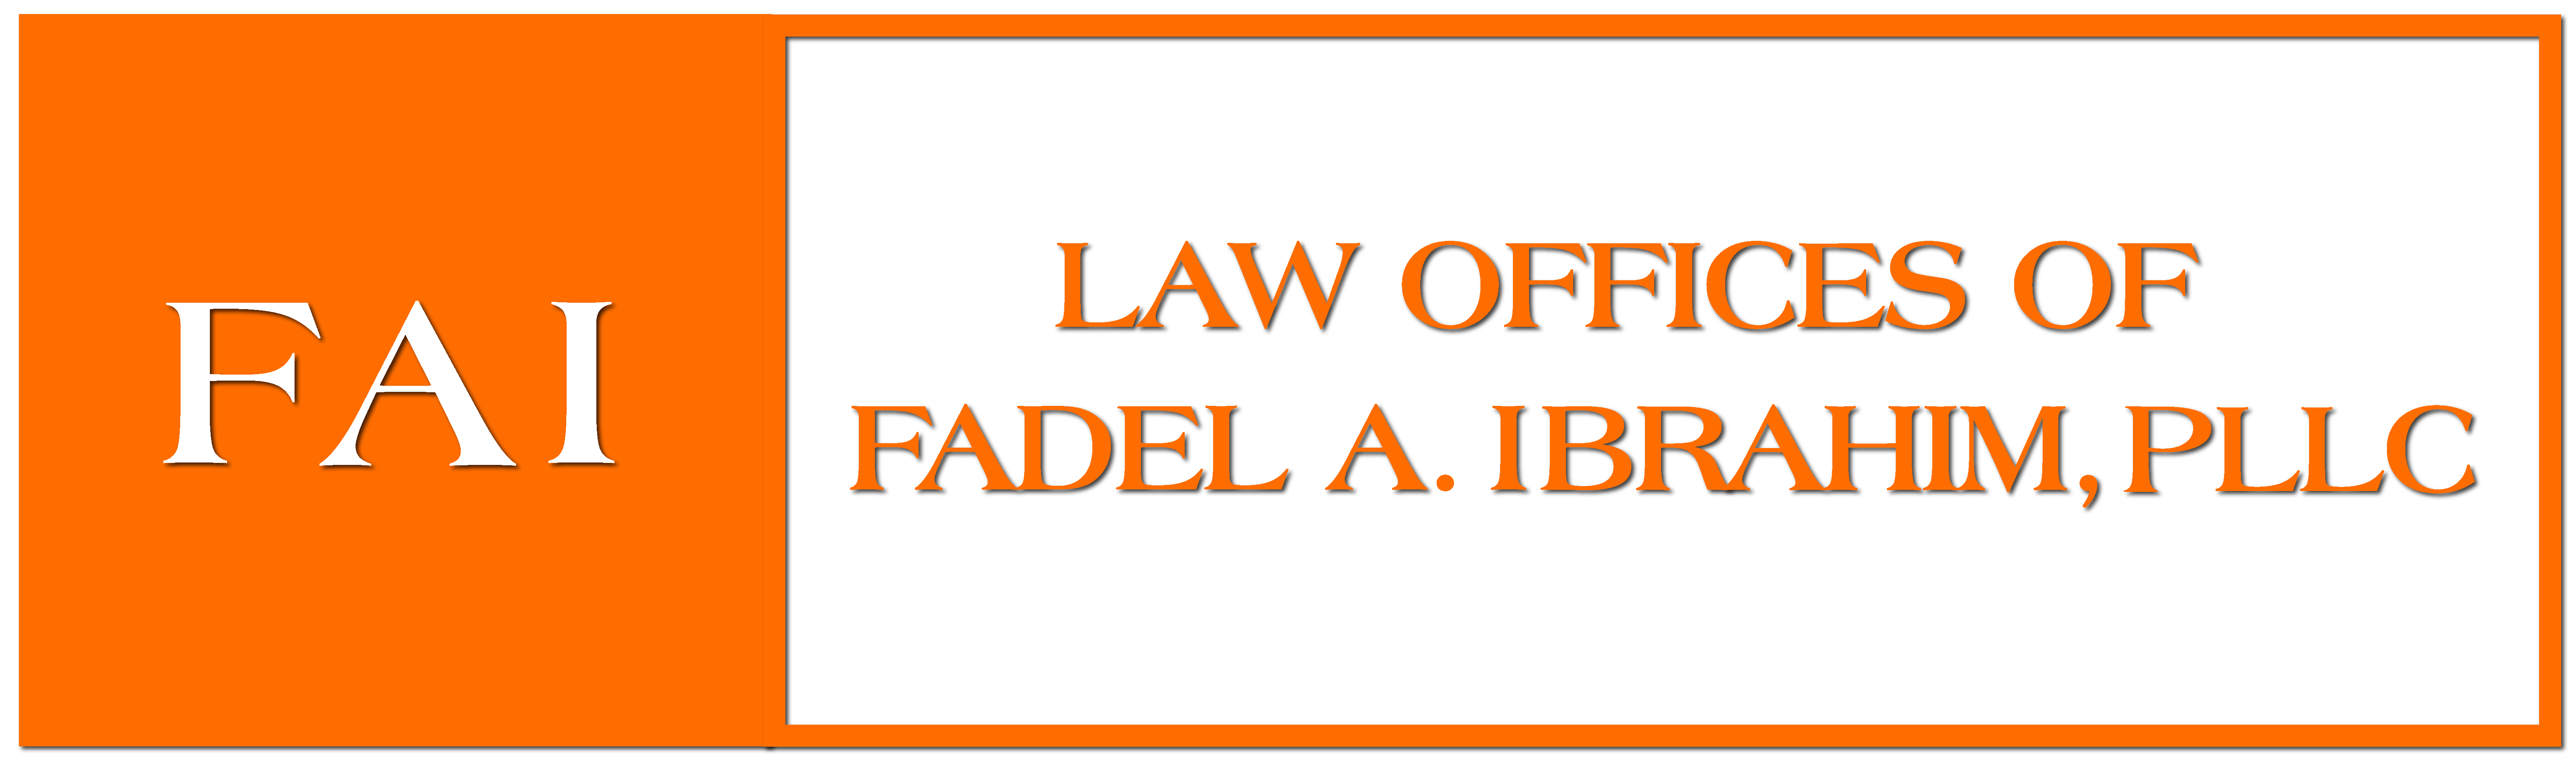 Law Offices of Fadel A. Ibrahim, PLLC Logo